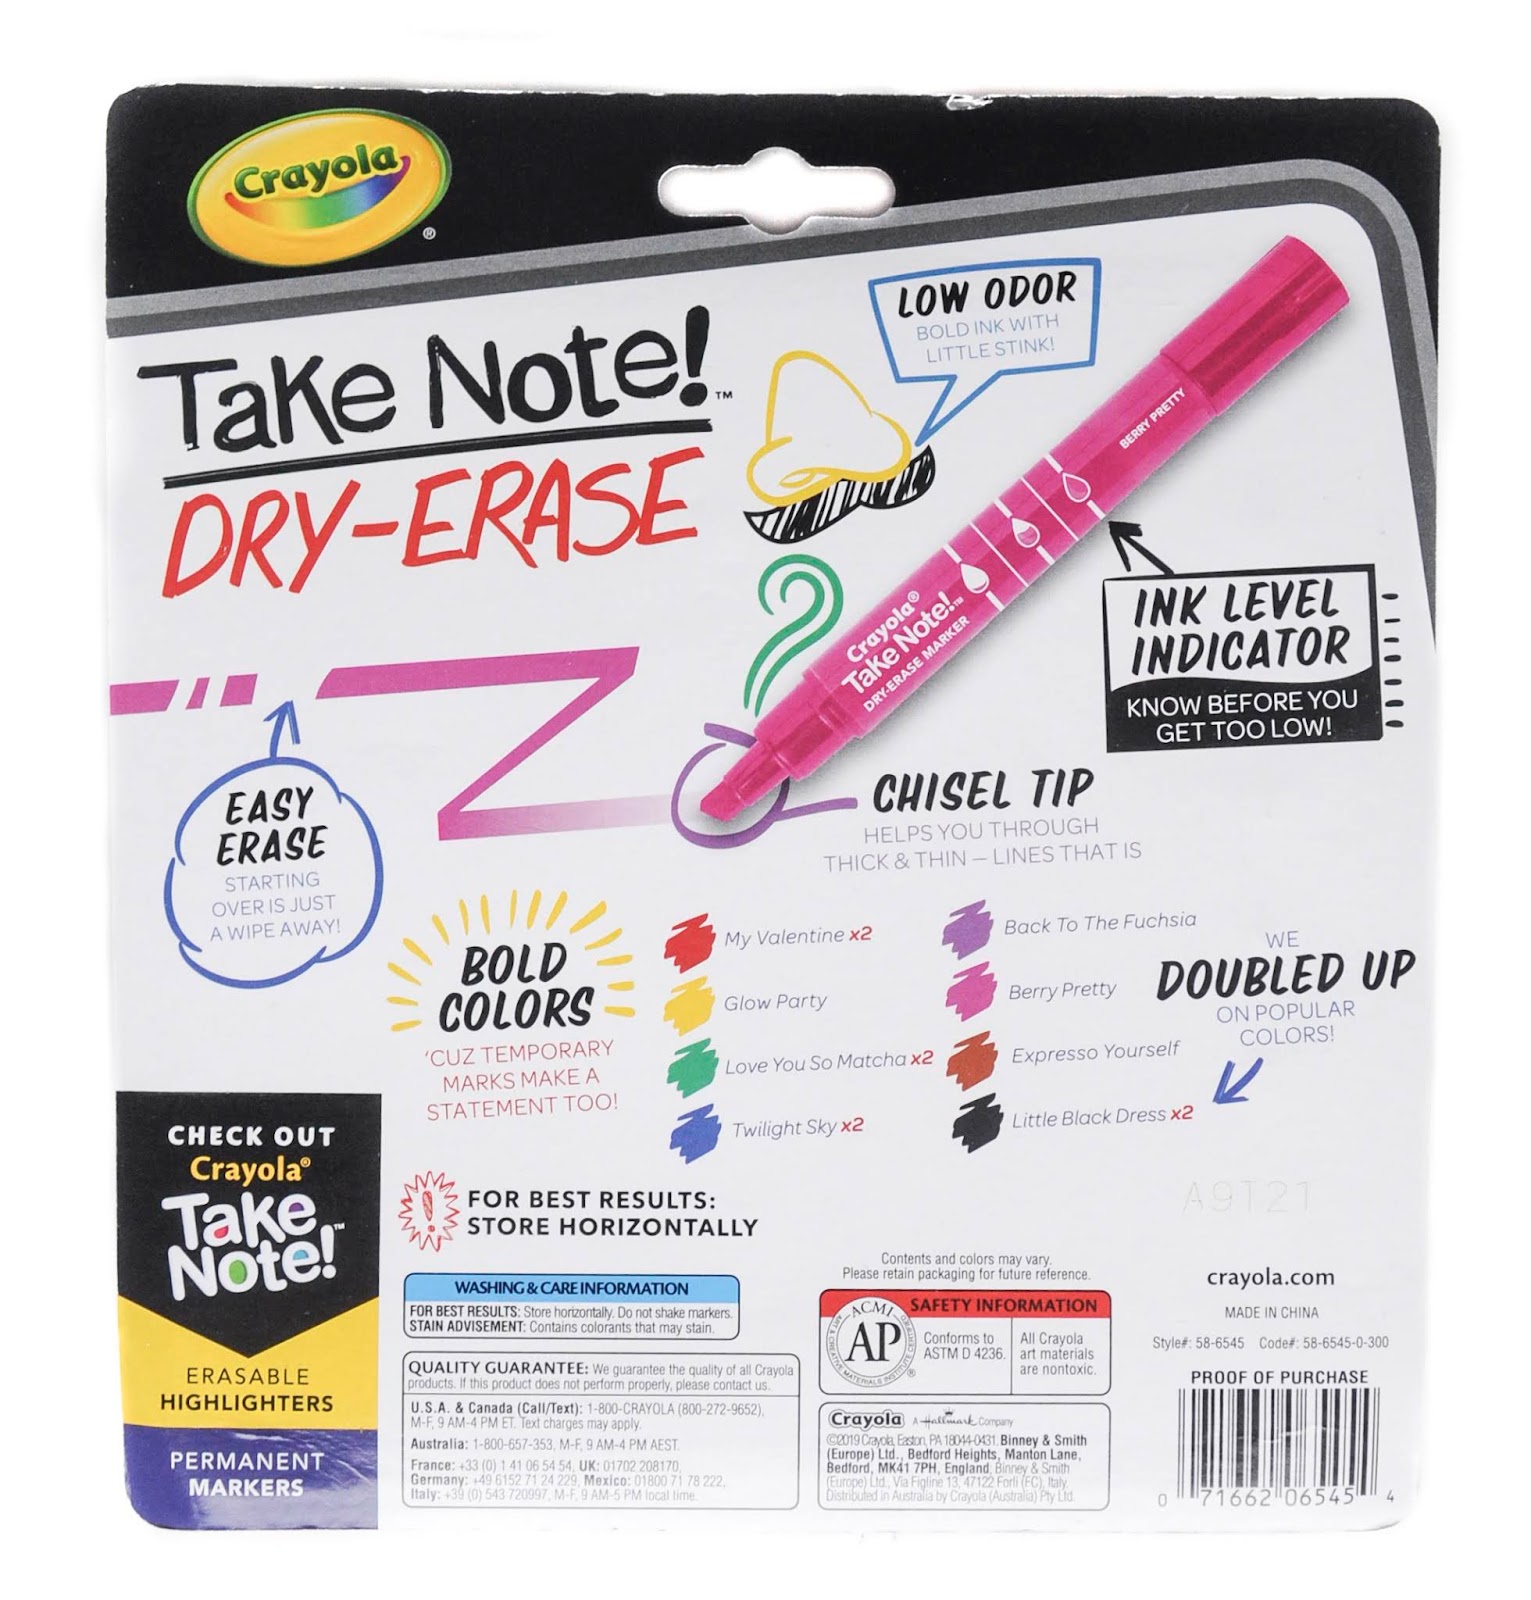 Crayola Take Note! No Harsh Odor Permanent Markers